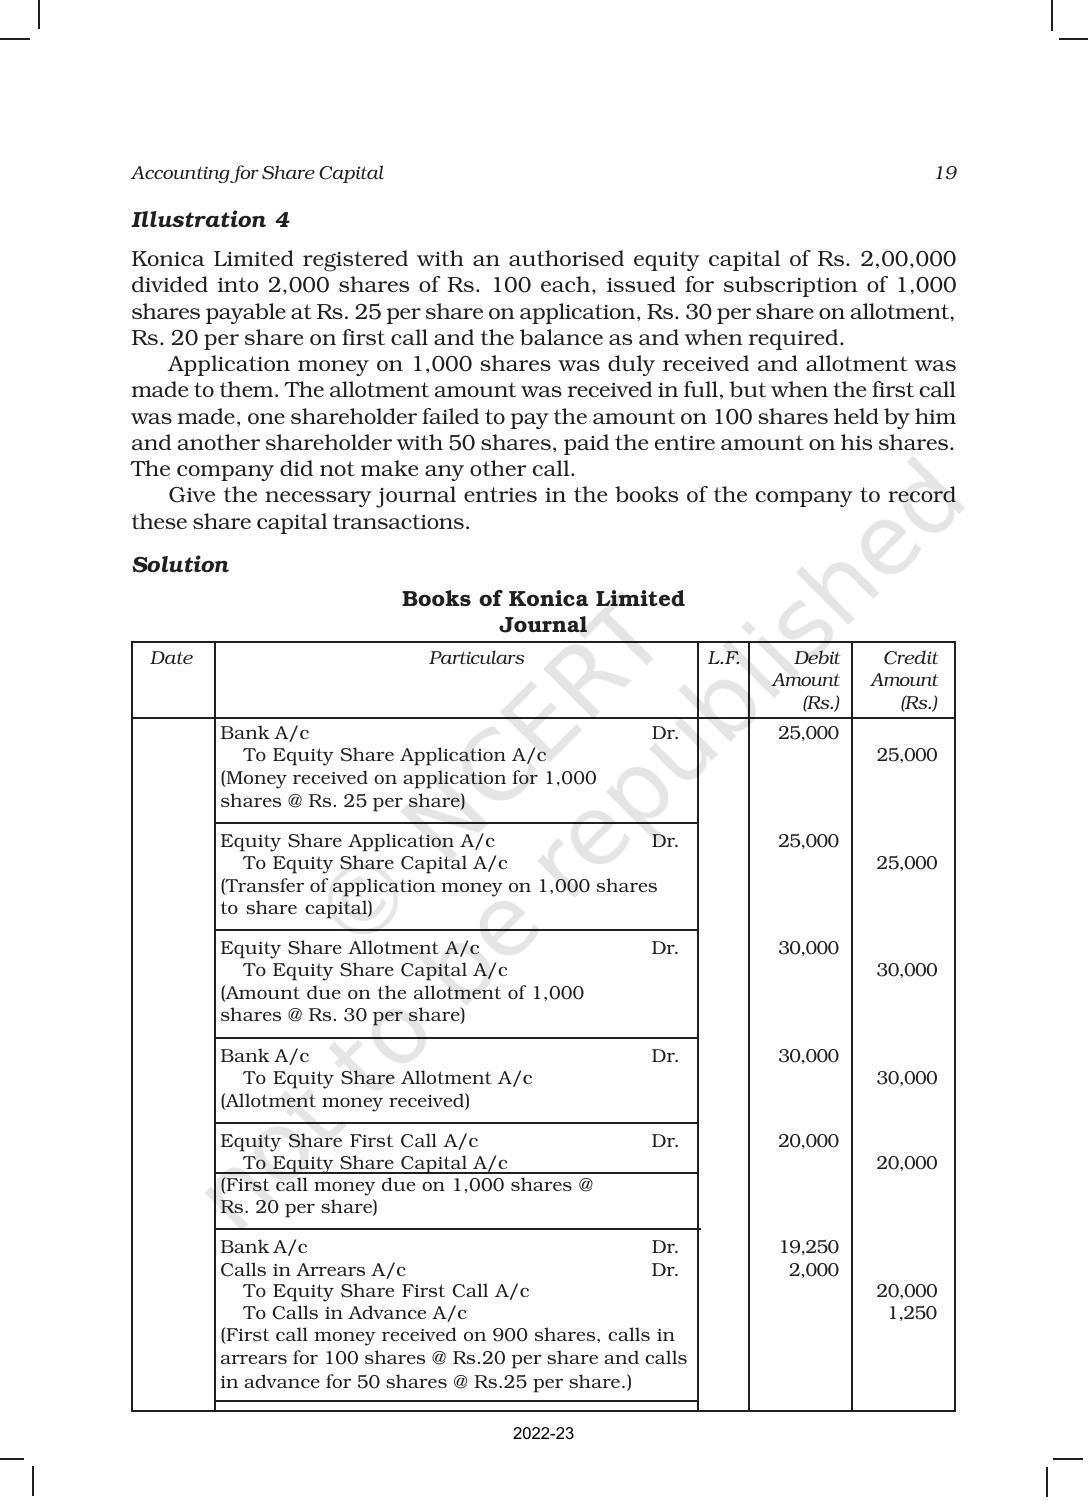 NCERT Book for Class 12 Accountancy Part II Chapter 1 Accounting for Share Capital - Page 19